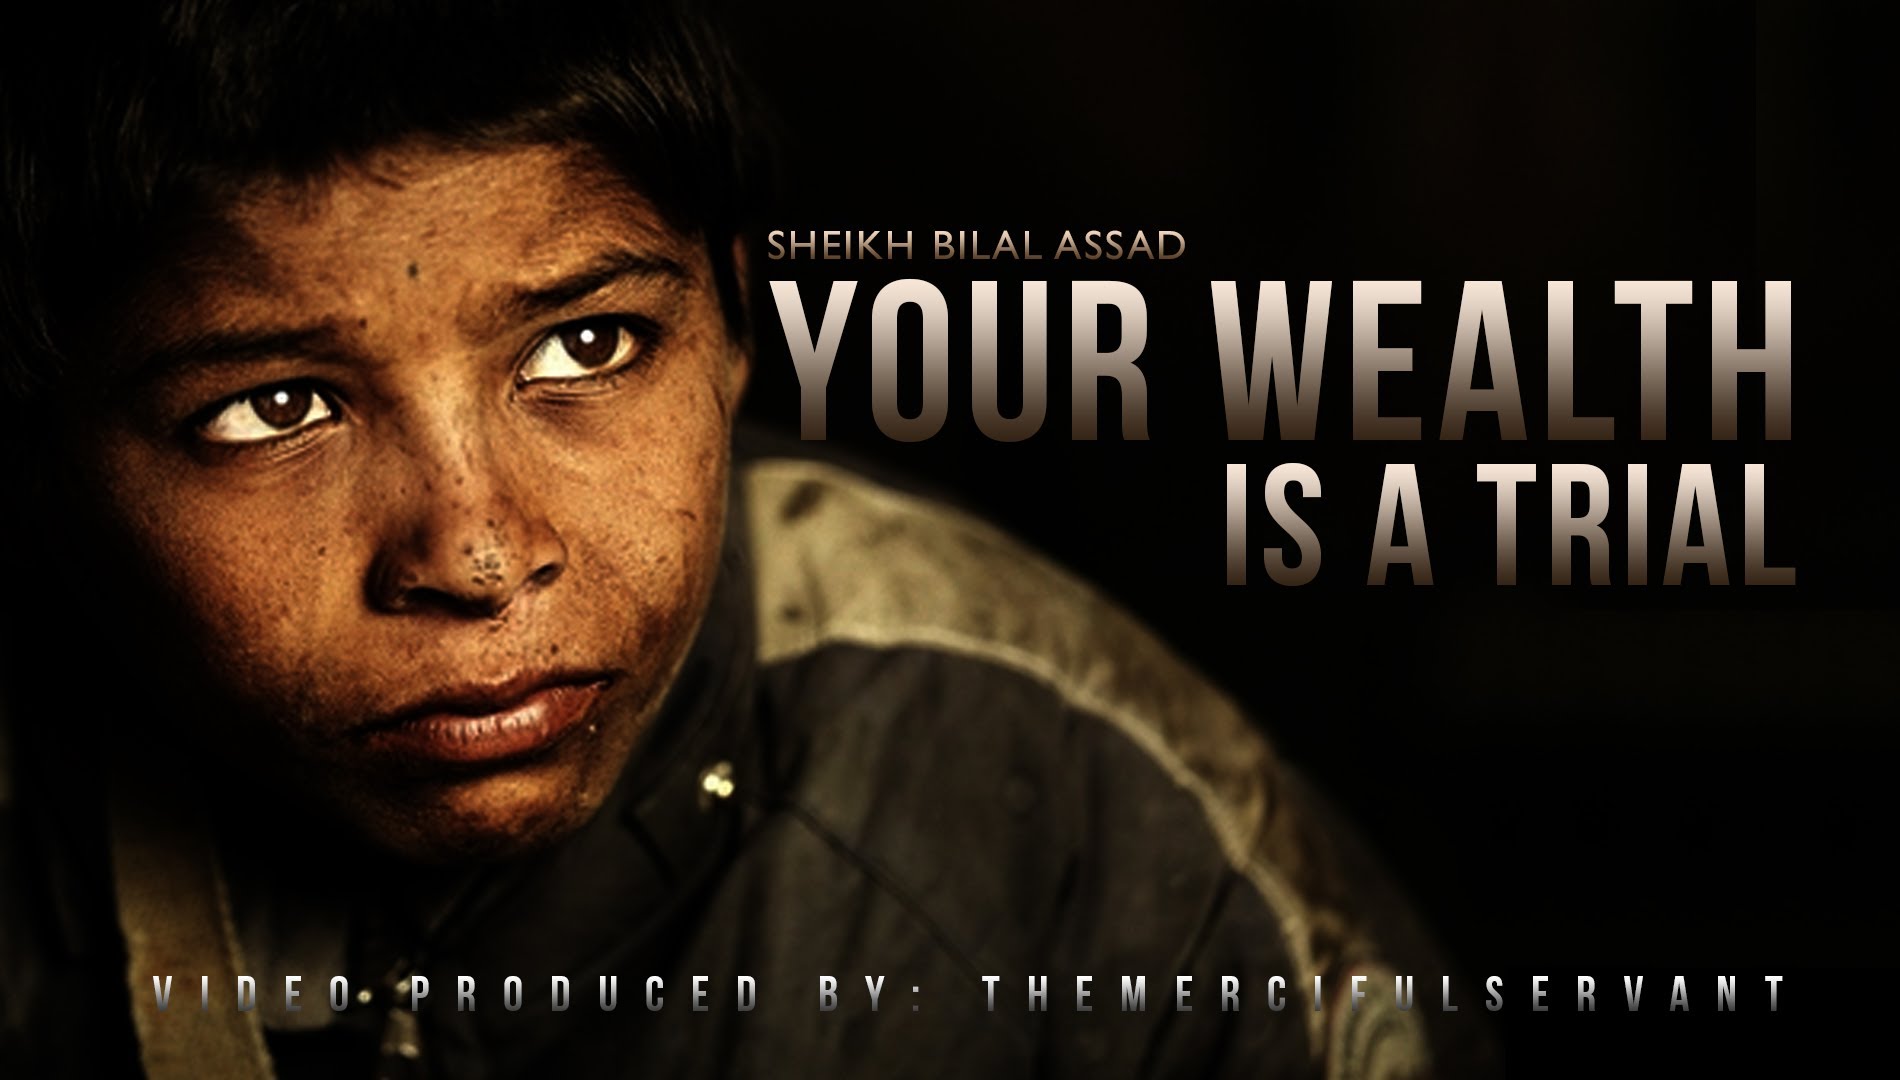 Your Wealth is A Trial - Shiekh Bilal Assad - Islamic Reminder